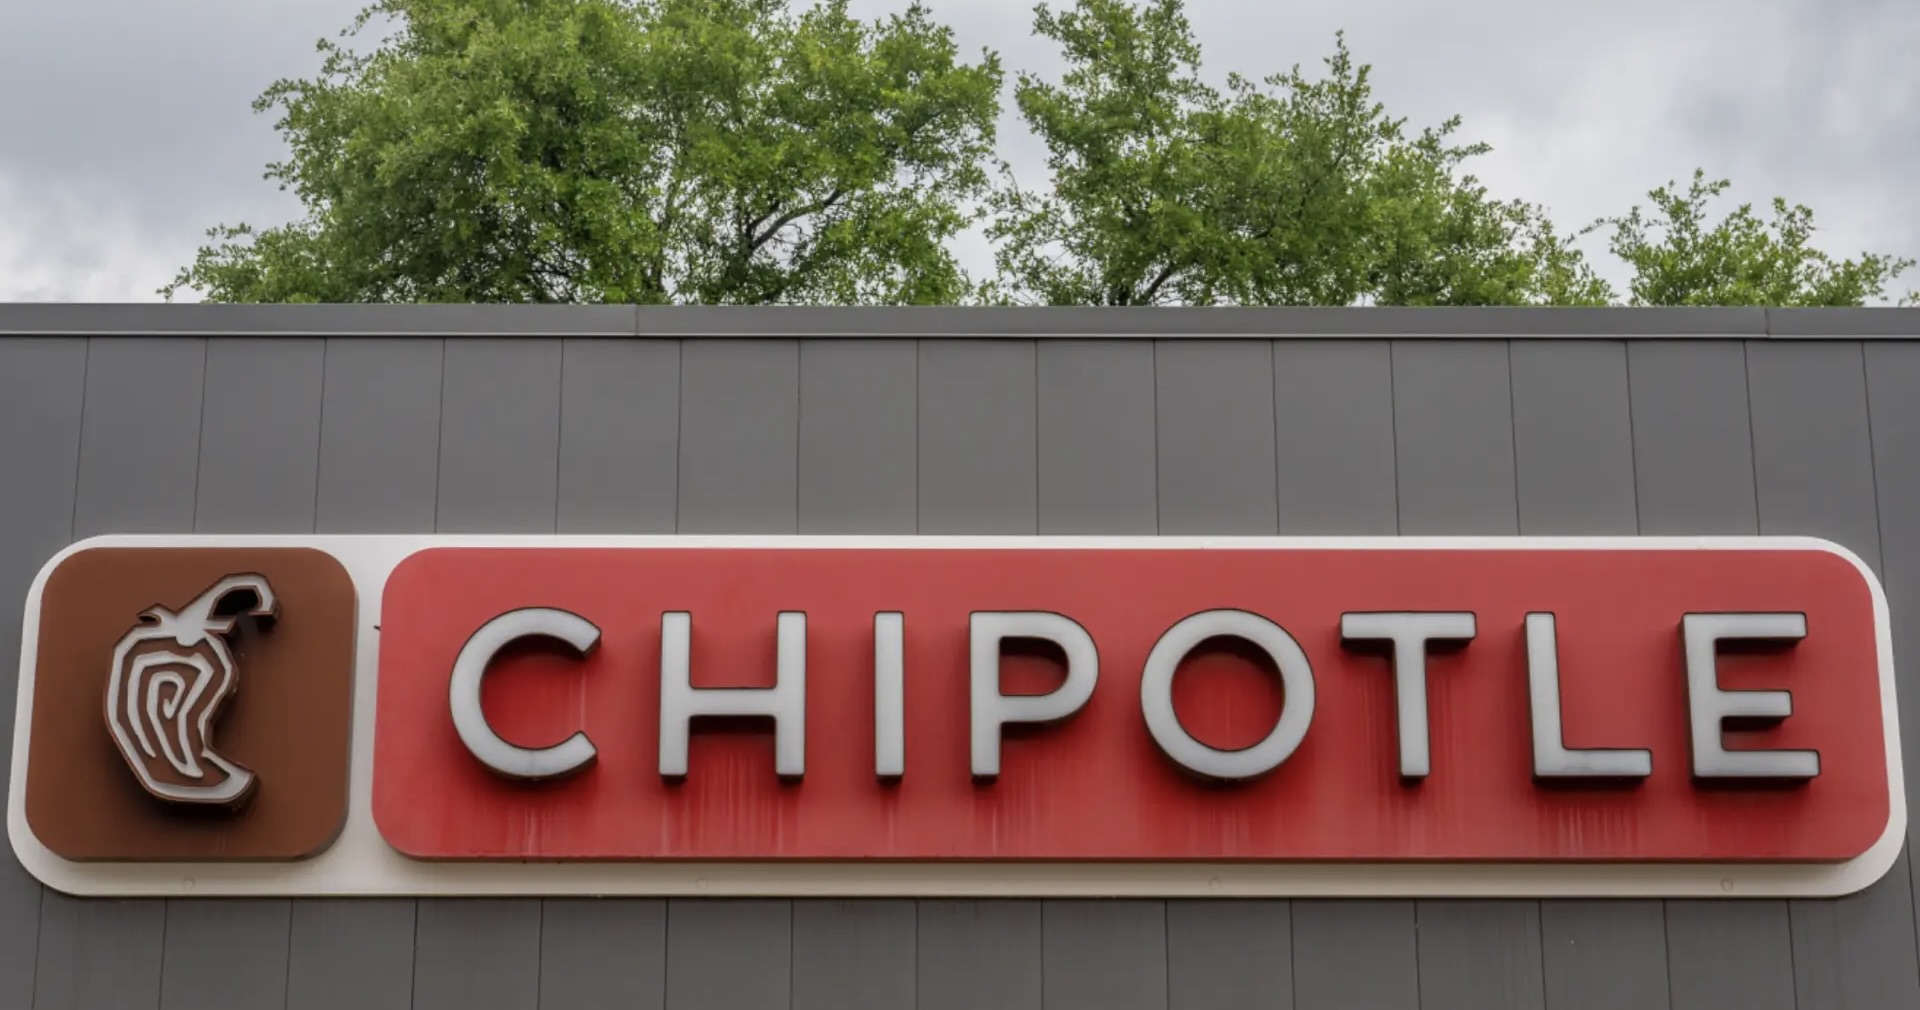 Say What Now? Chipotle Customer Trashes Restaurant Because Food Isn’t Prepared Fast Enough